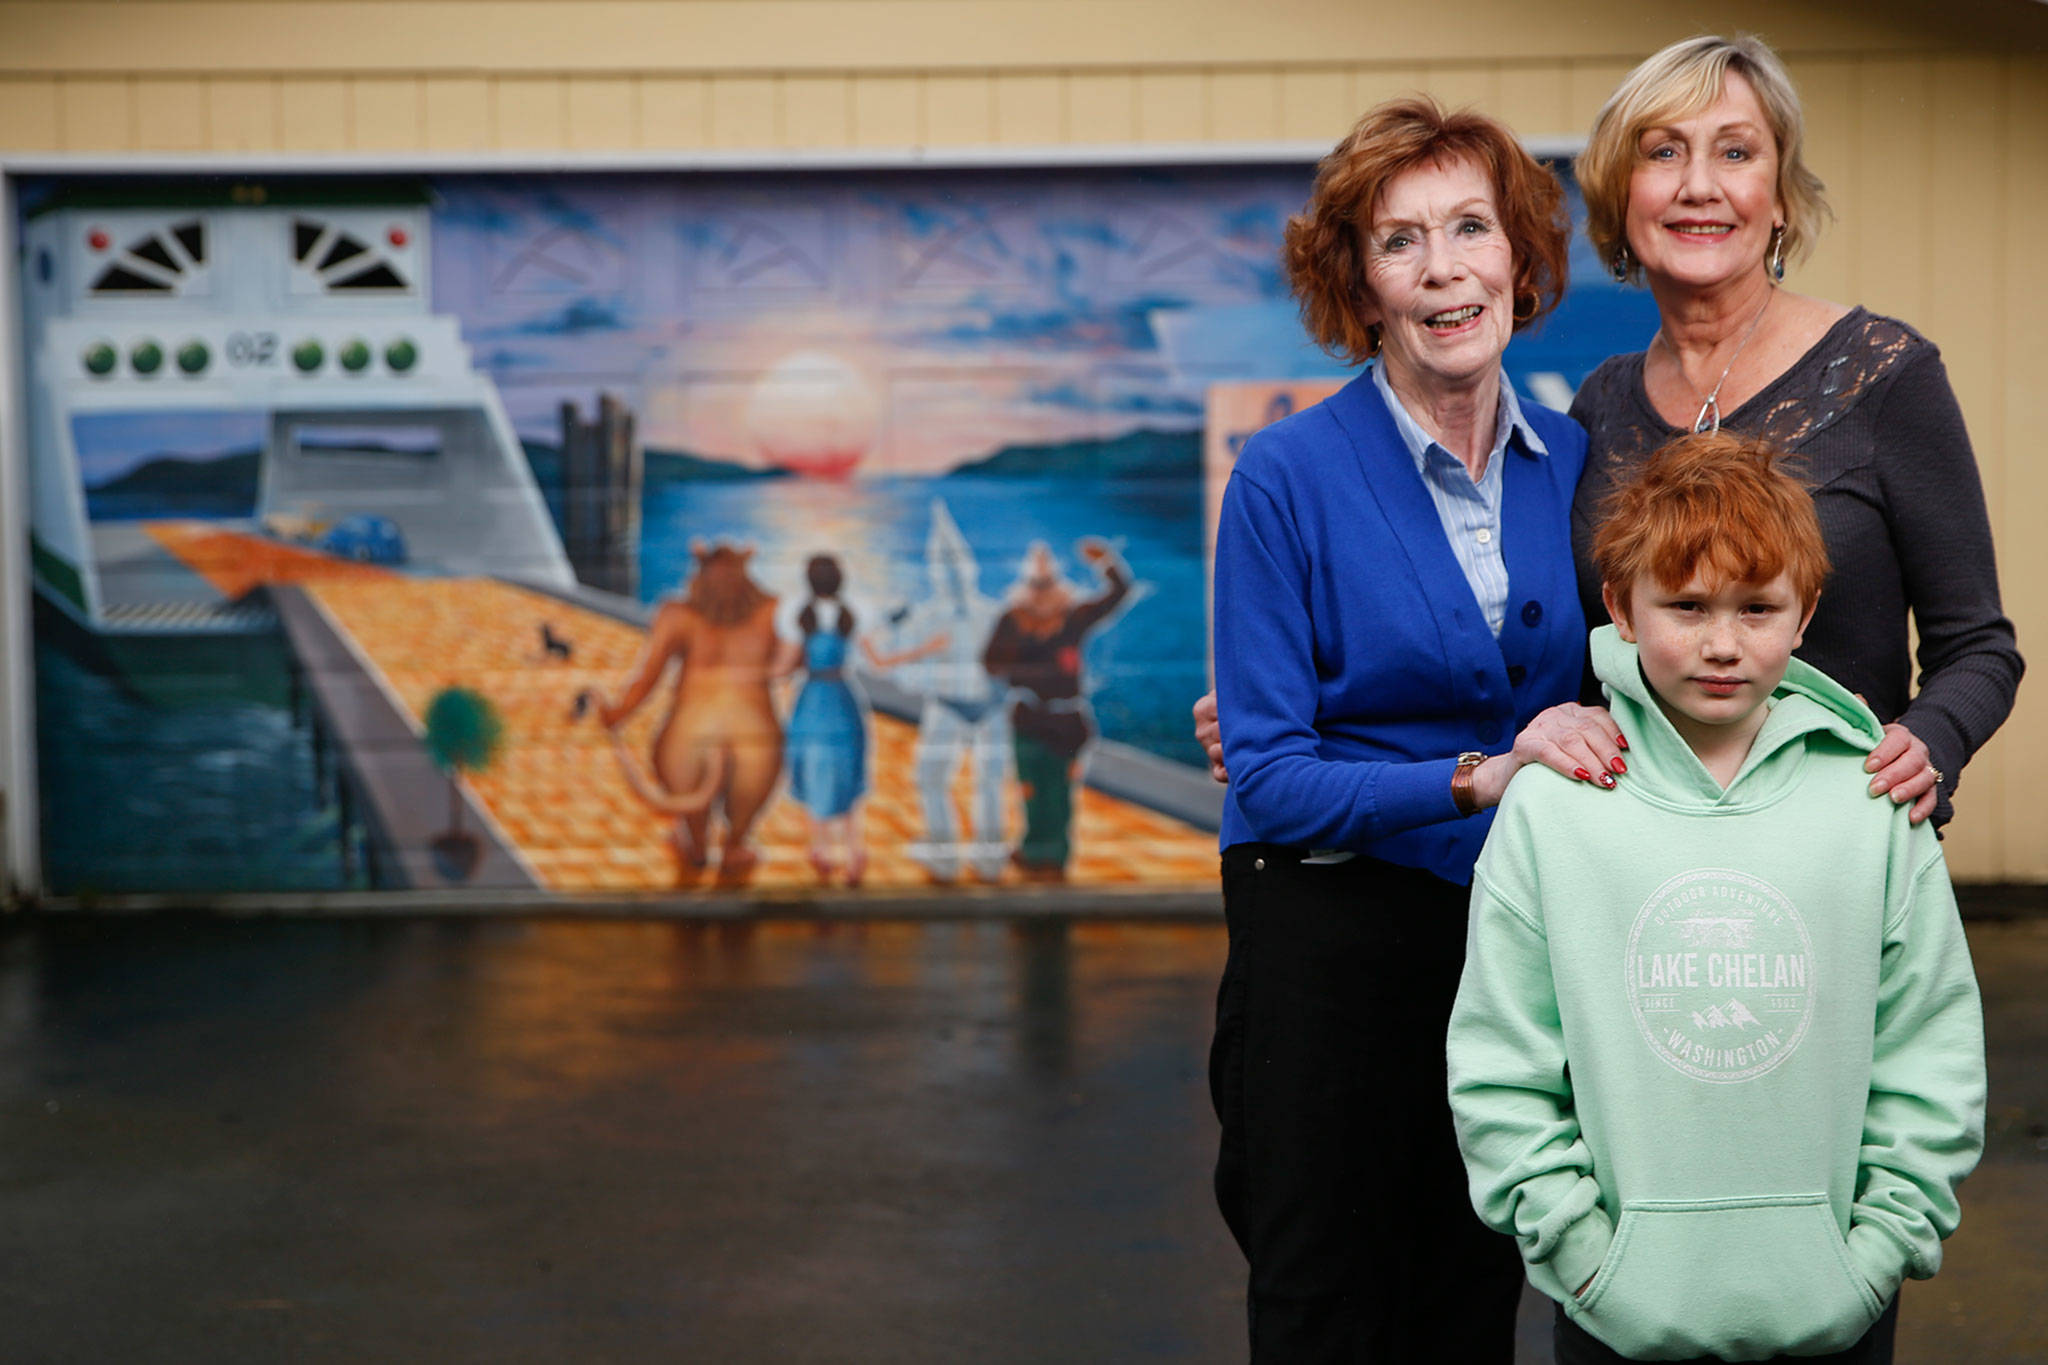 Sharon Pittman, her daughter Diana Jessen and her grandson Xander Pittman, 8, stand in front of a mural on the garage door of her home. It was painted in 2009 by Monroe muralist David Hose in 2009, who has done numerous murals around Snohomish County. (Kevin Clark / The Herald)